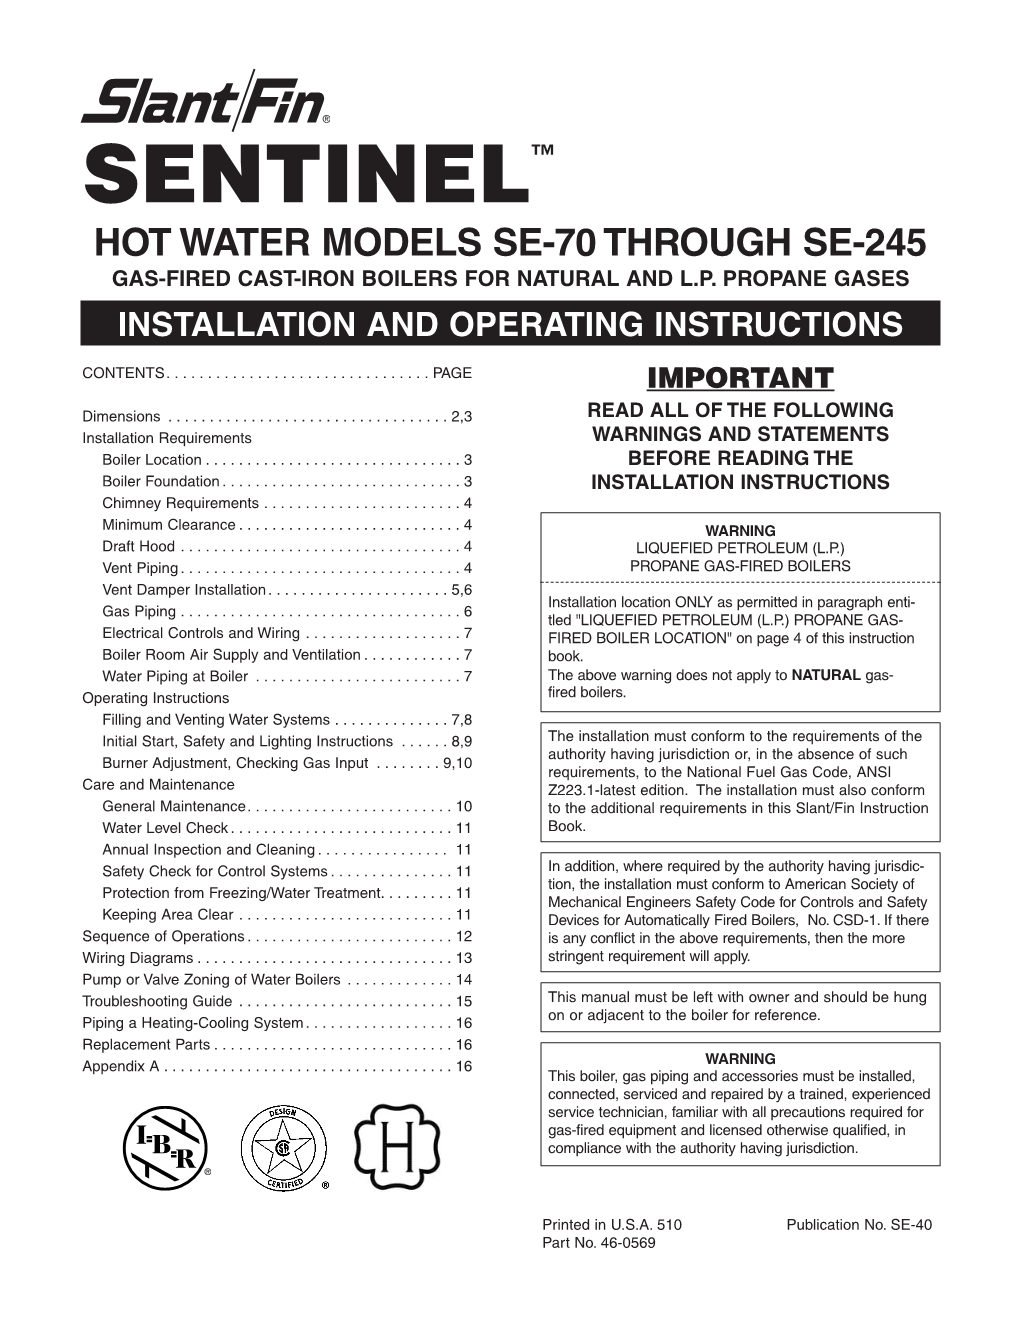 Sentinel™ Hot Water Models Se-70 Through Se-245 Gas-Fired Cast-Iron Boilers for Natural and L.P